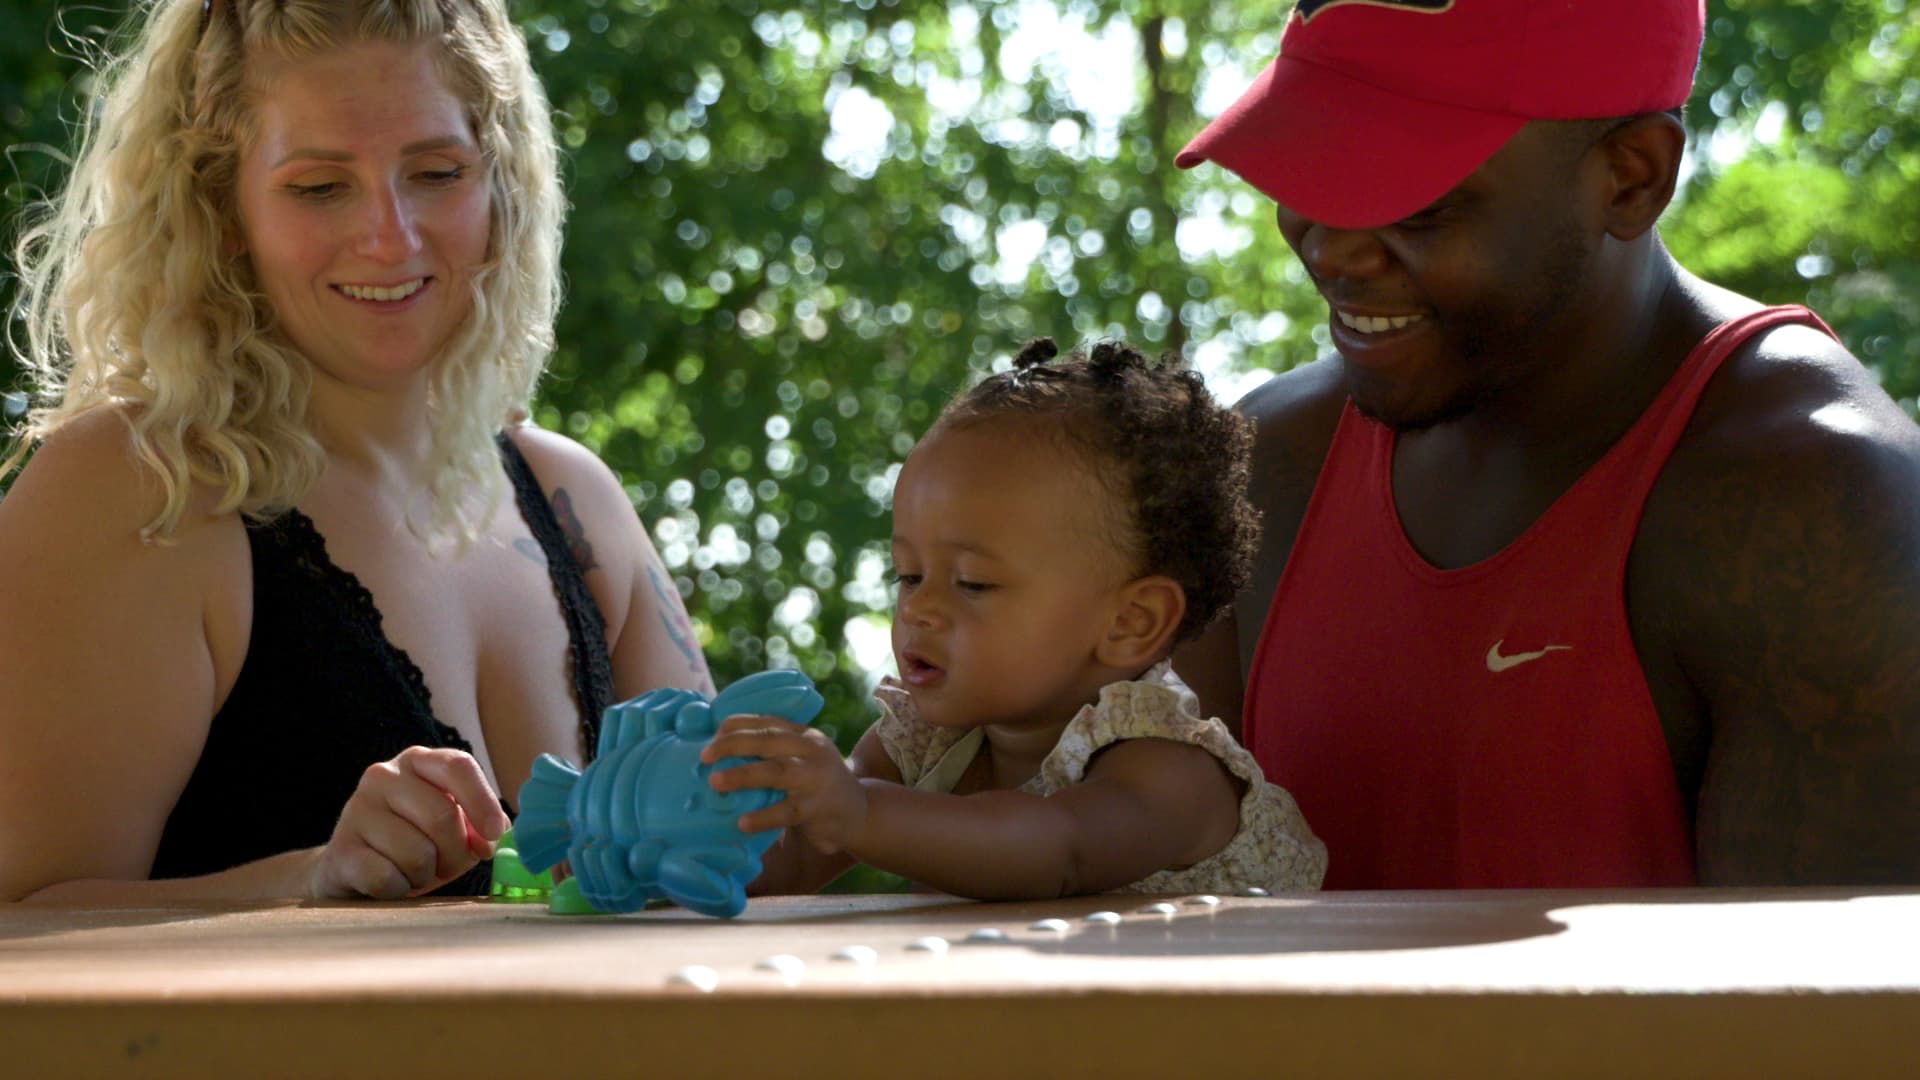 Amber and Jaylyn Bush travel around the U.S. with their 1-year-old daughter, Journey.